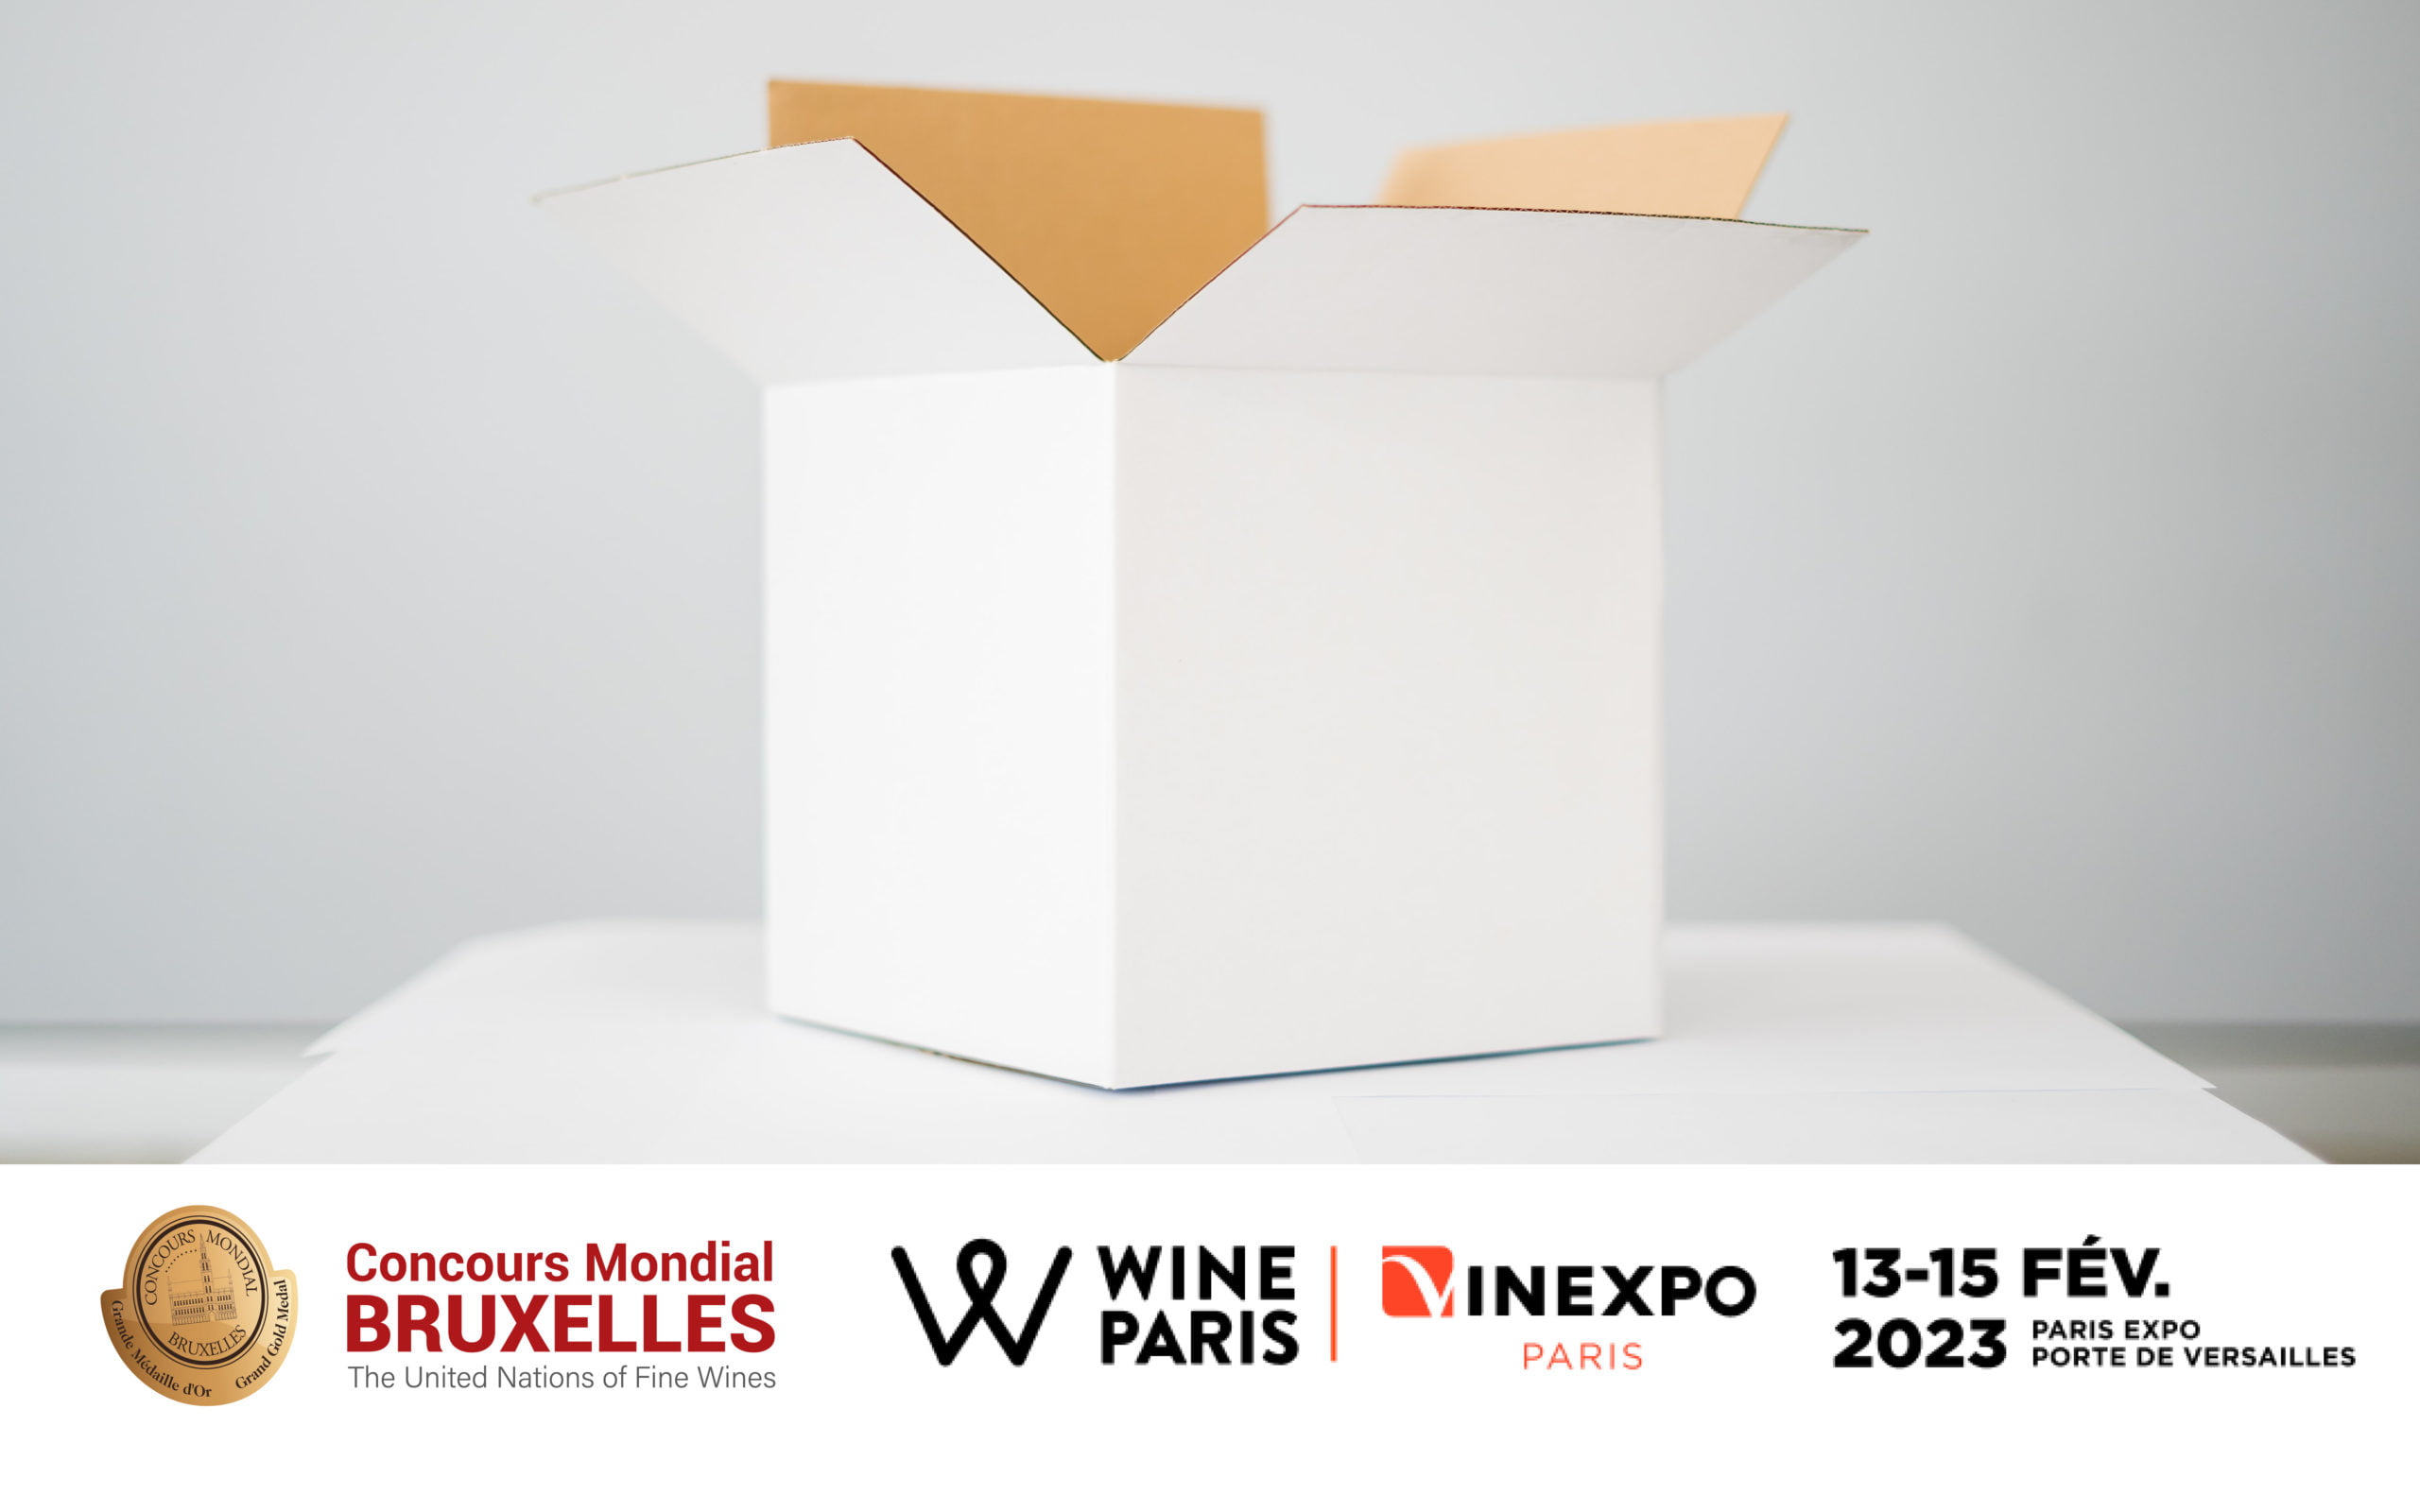 Sample collection at Wine Paris 2023